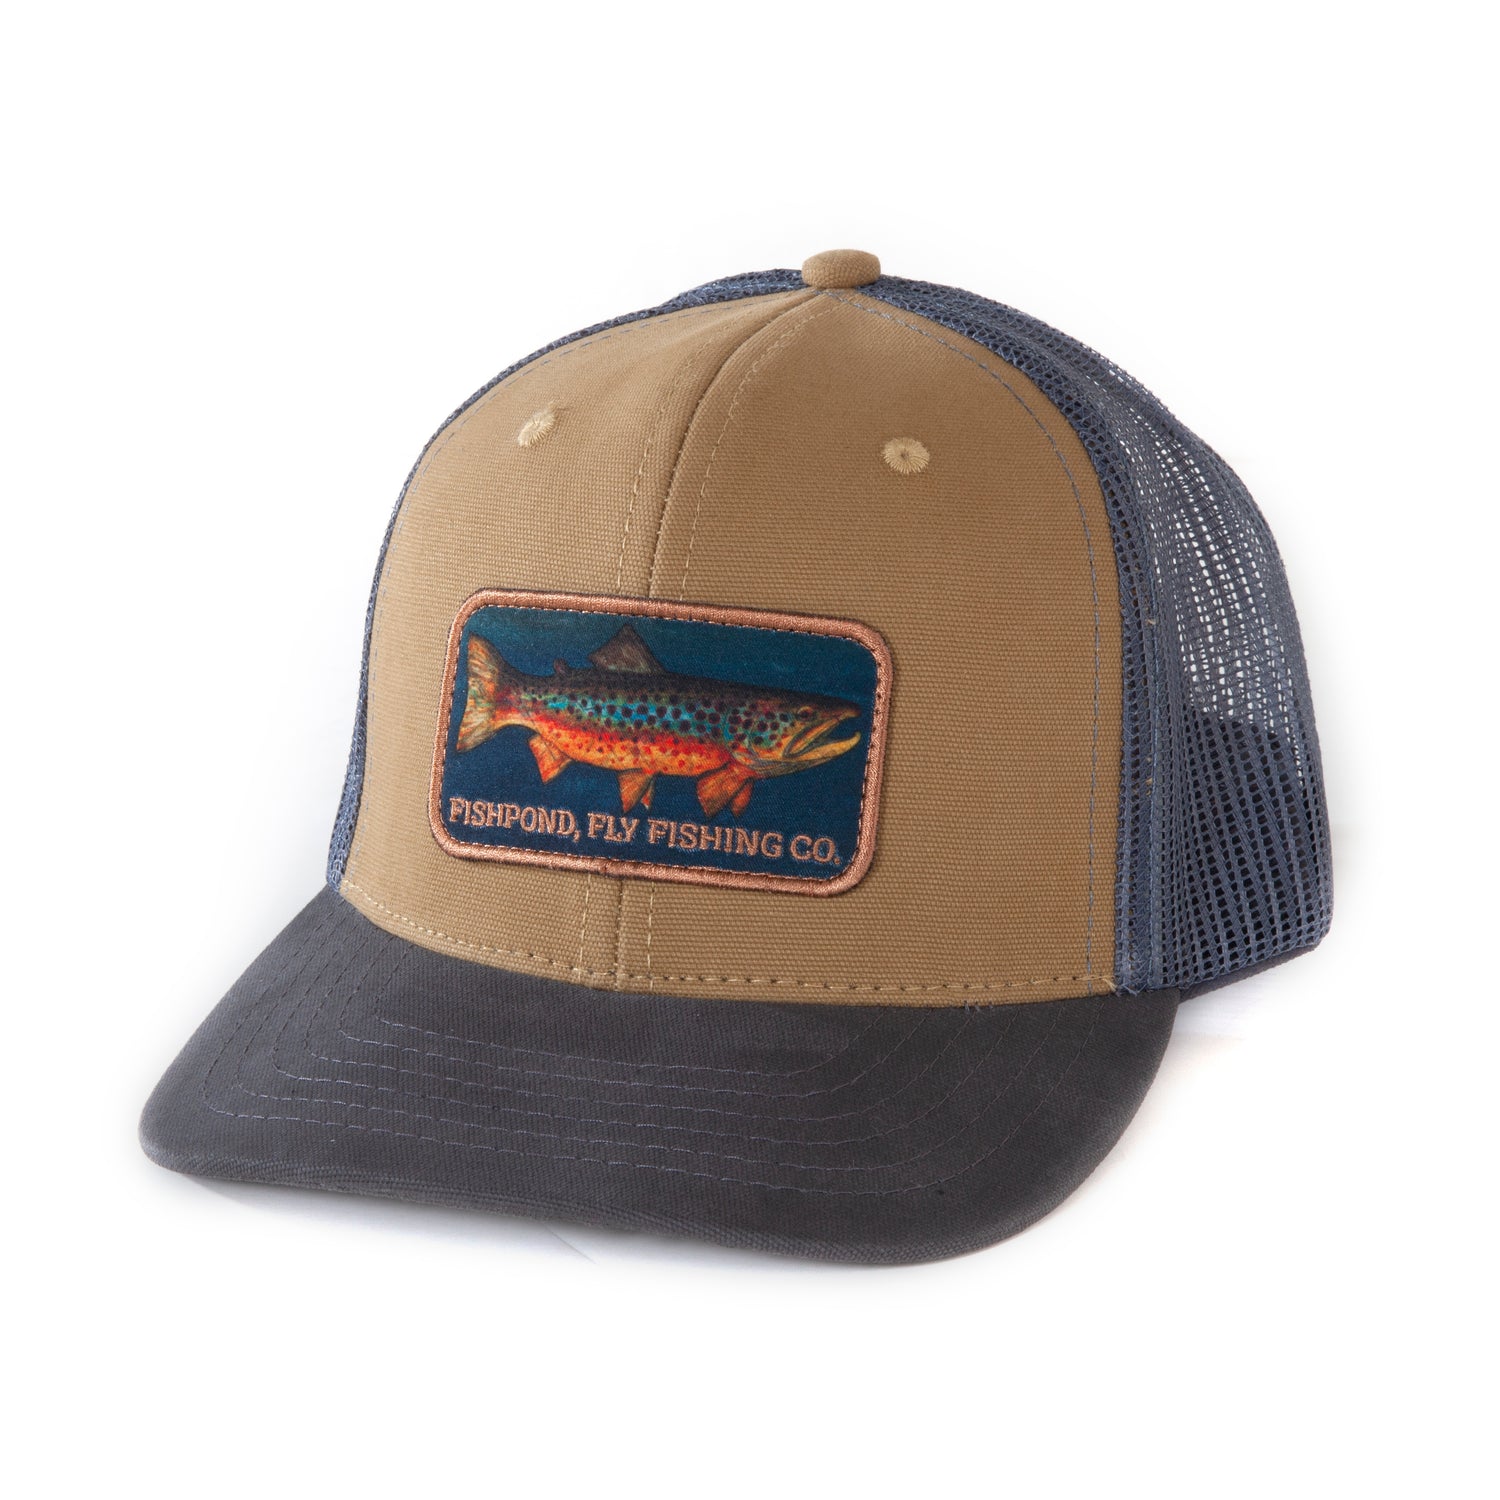 Fishpond High and Dry Hat